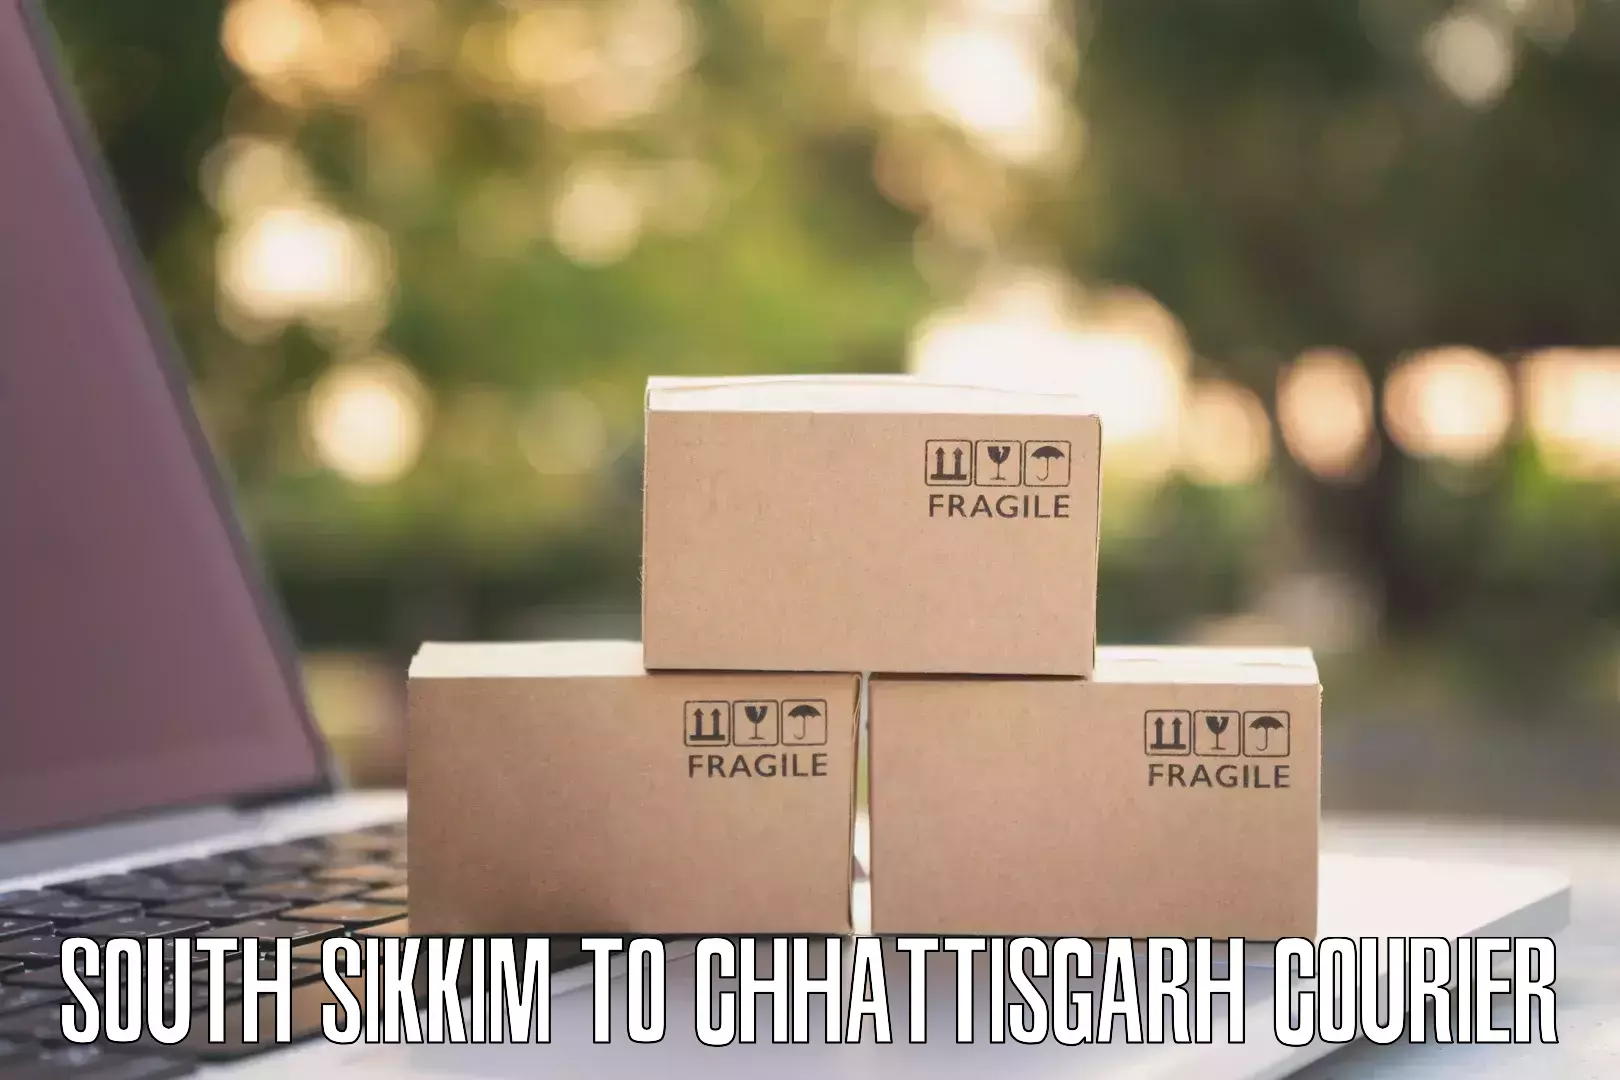 Subscription-based courier South Sikkim to Shivrinarayan